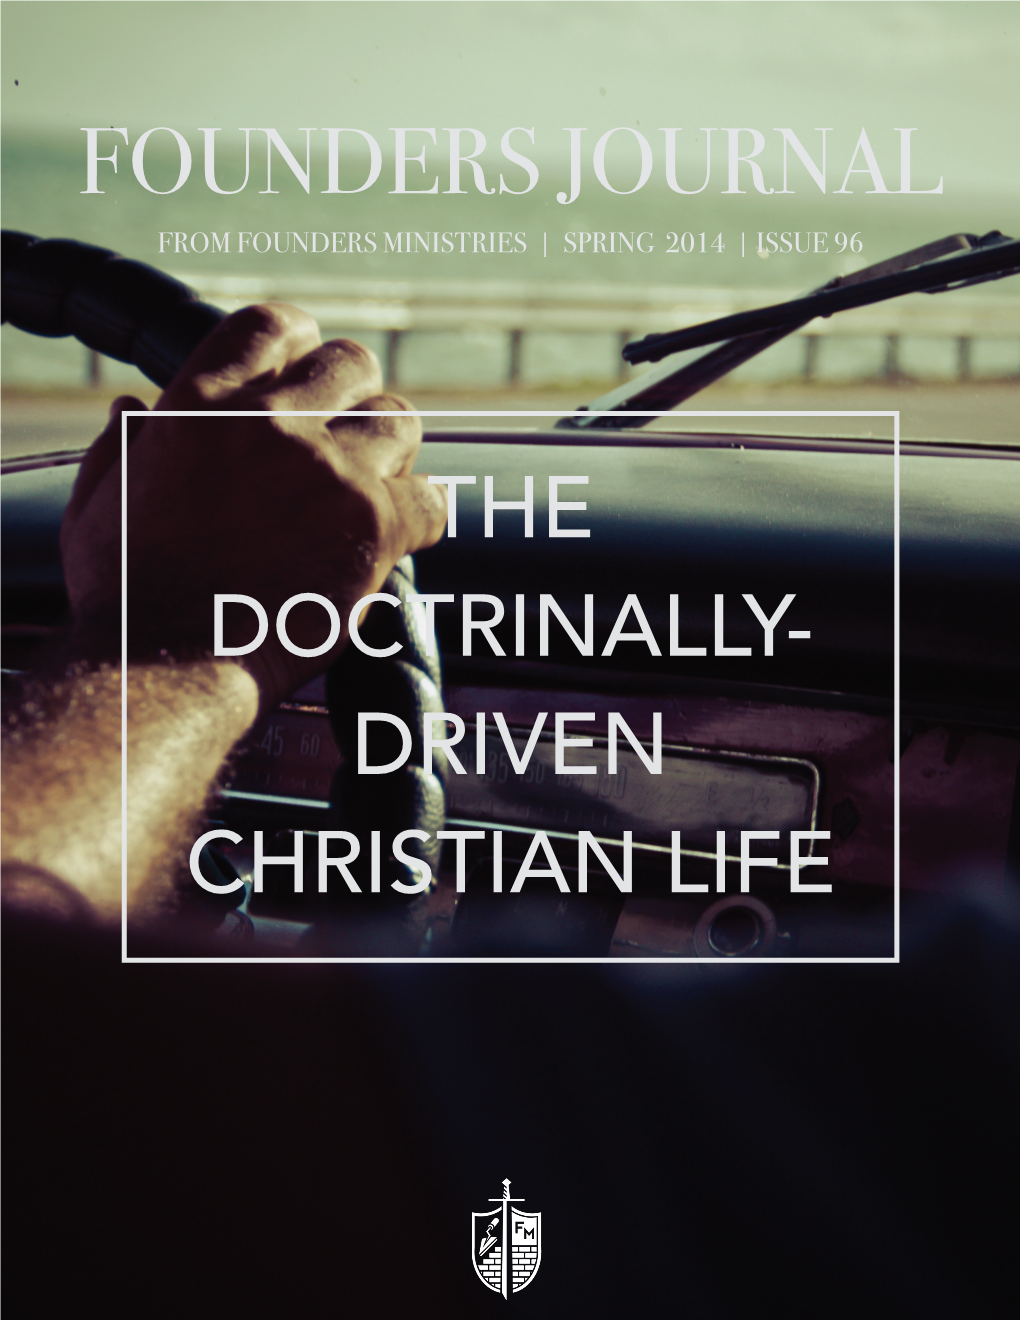 Founders Journal from Founders Ministries | Spring 2014 | Issue 96